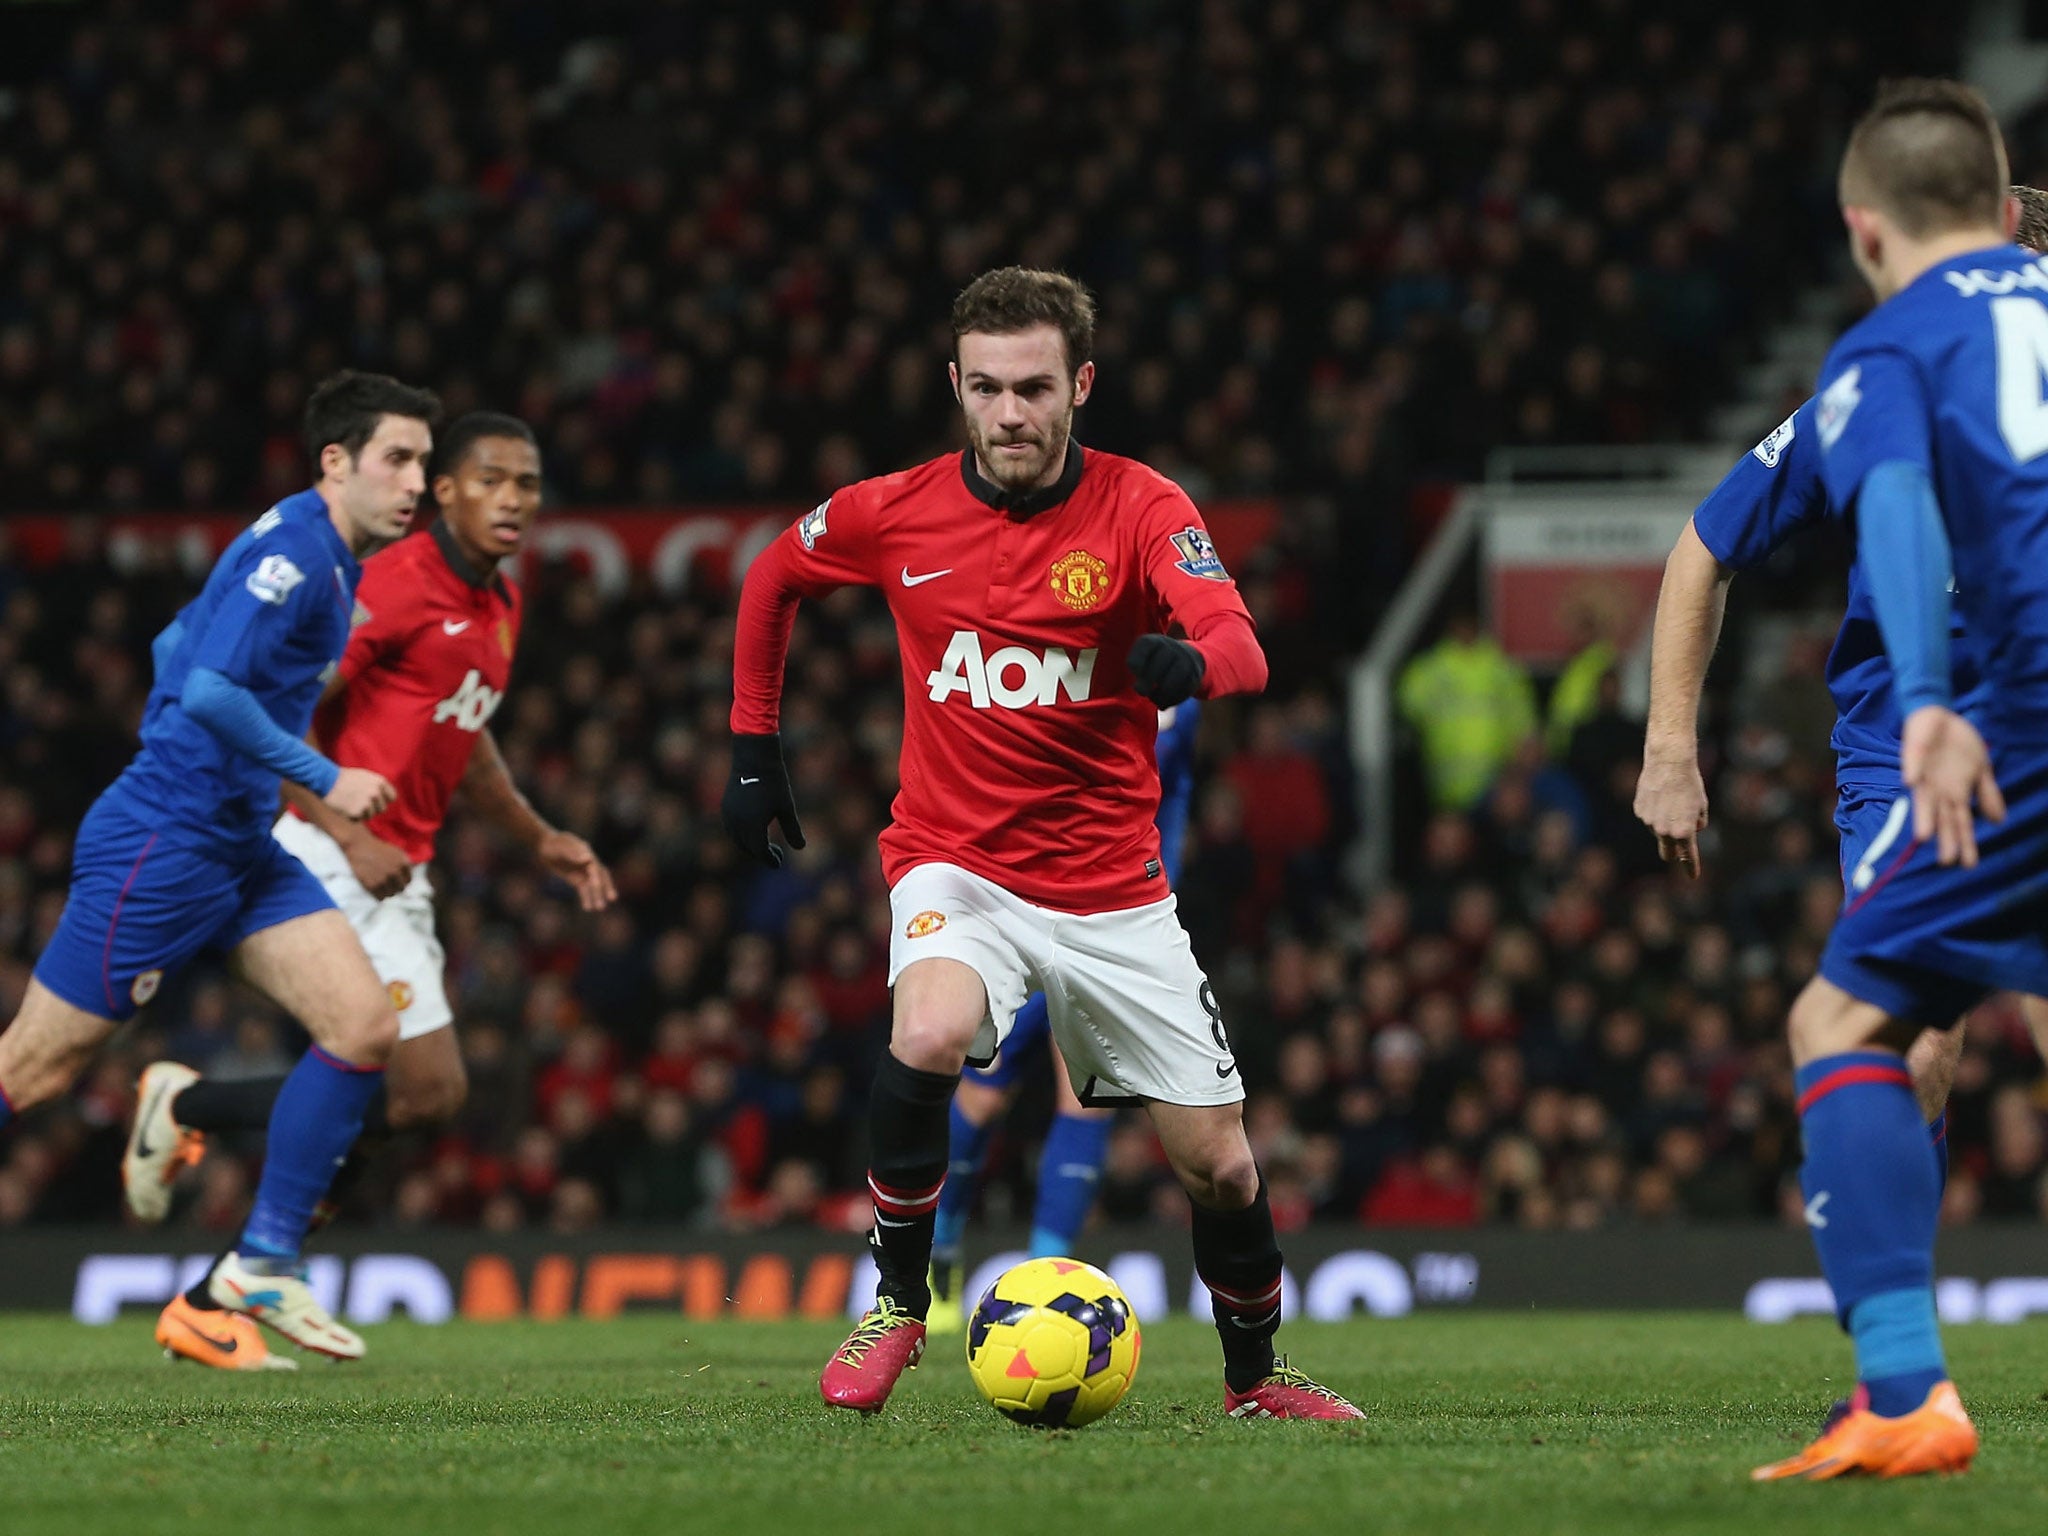 Juan Mata in action on his debut for Manchester United against Cardiff